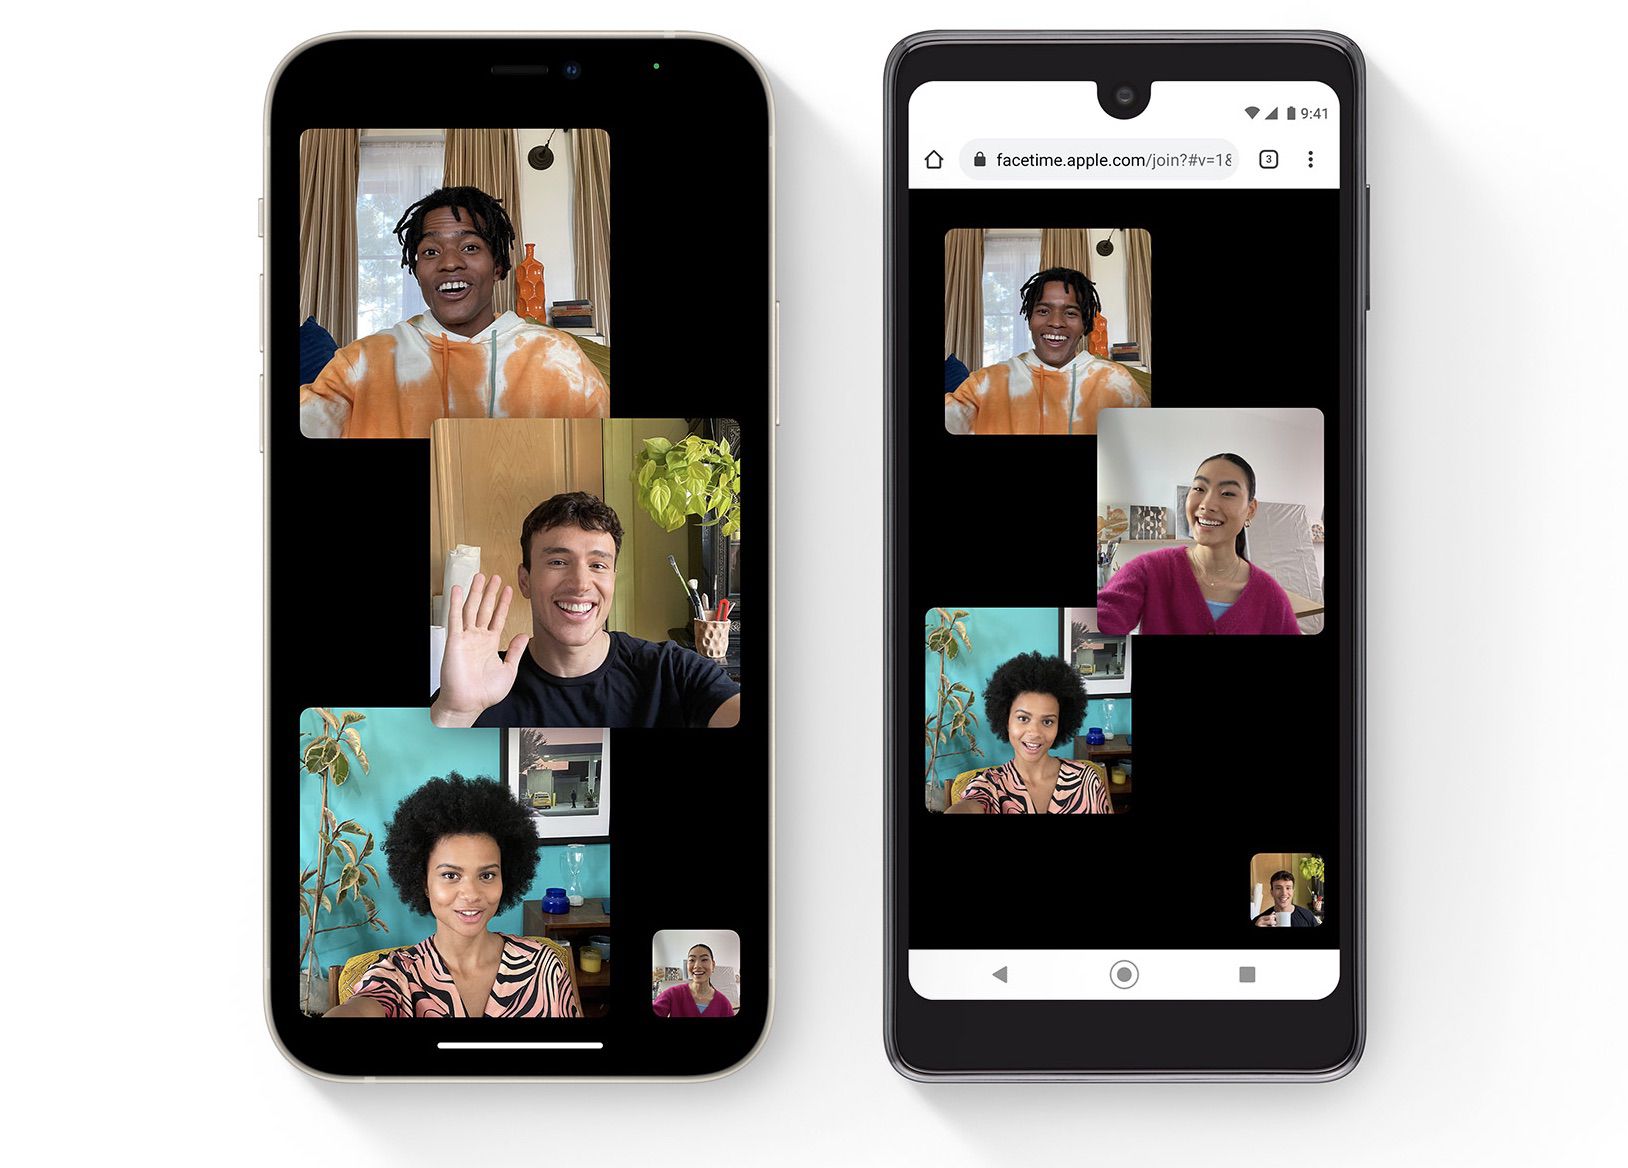 iOS 15 FaceTime to PC and Android With New Option to on the Web - MacRumors